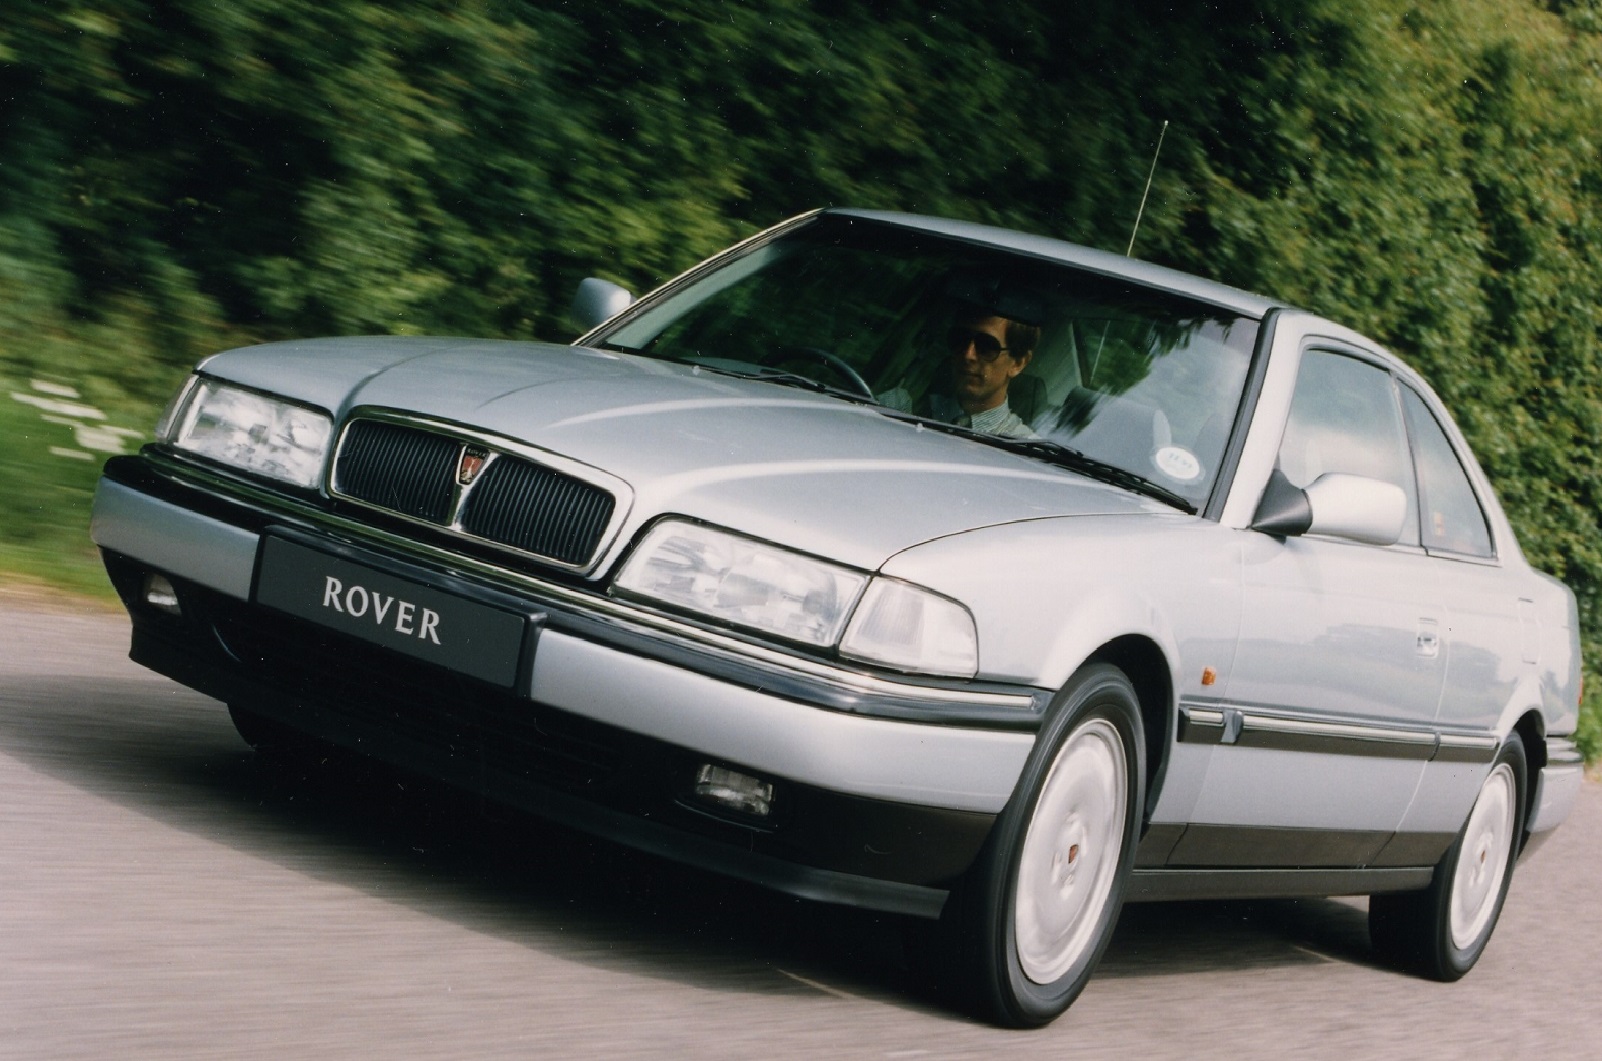 <p>Rover was in desperate need of a sales hitter when it launched the 800. The previous SD1 was a clever design but marred by quality issues, so basing the 800 on the Honda Legend was sound thinking. It may have lacked the avant-garde appeal of its predecessor, but the middle managers of Britain loved it enough for more than 300,000 to roll out of showrooms.</p><p>The model was branded <strong>Sterling</strong> in the USA but was much less of a success in that market, and the <strong>Coupe</strong> (pictured) – designed for America, though it never got there - was and remains a rare and quite enticing oddity.</p>